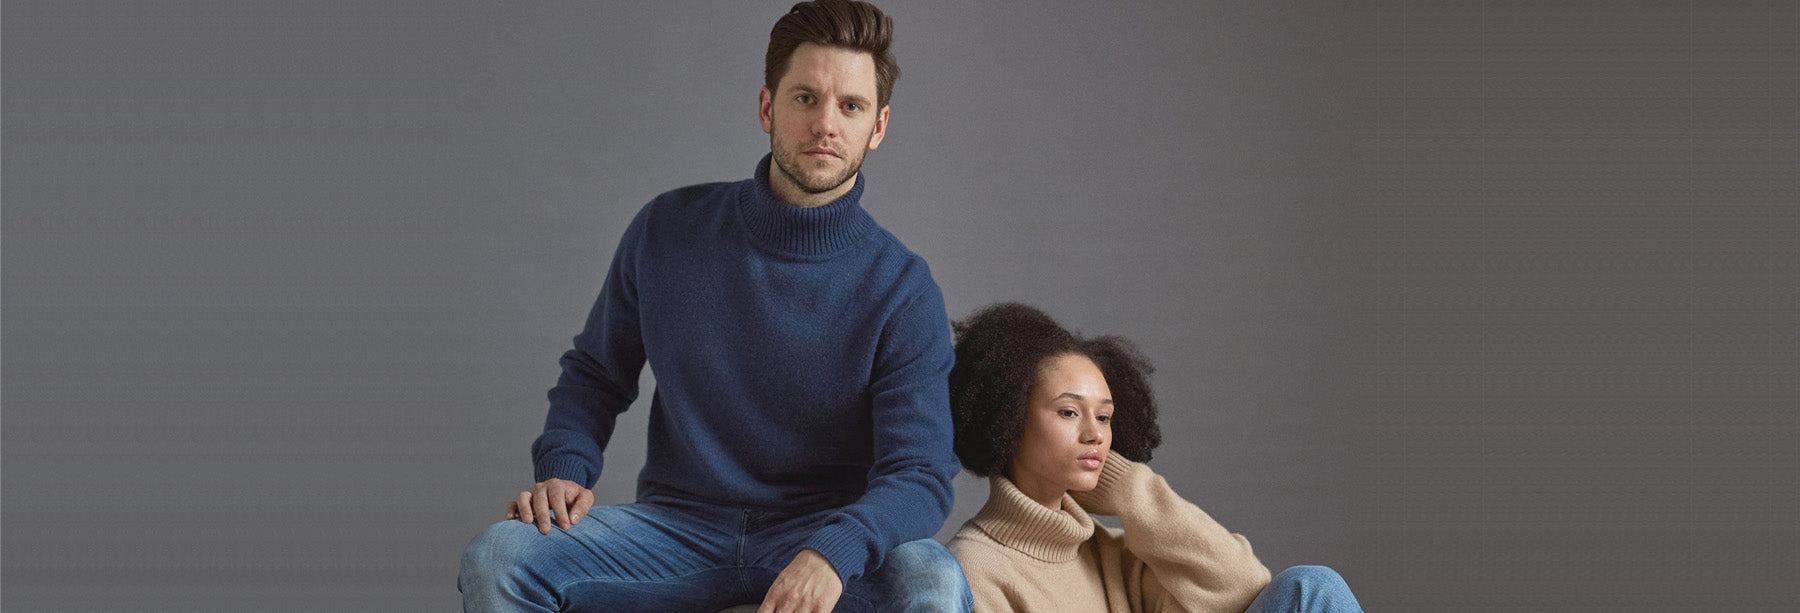 Cashmere for him and her from Kashmina. Sweaters in 100% cashmere.